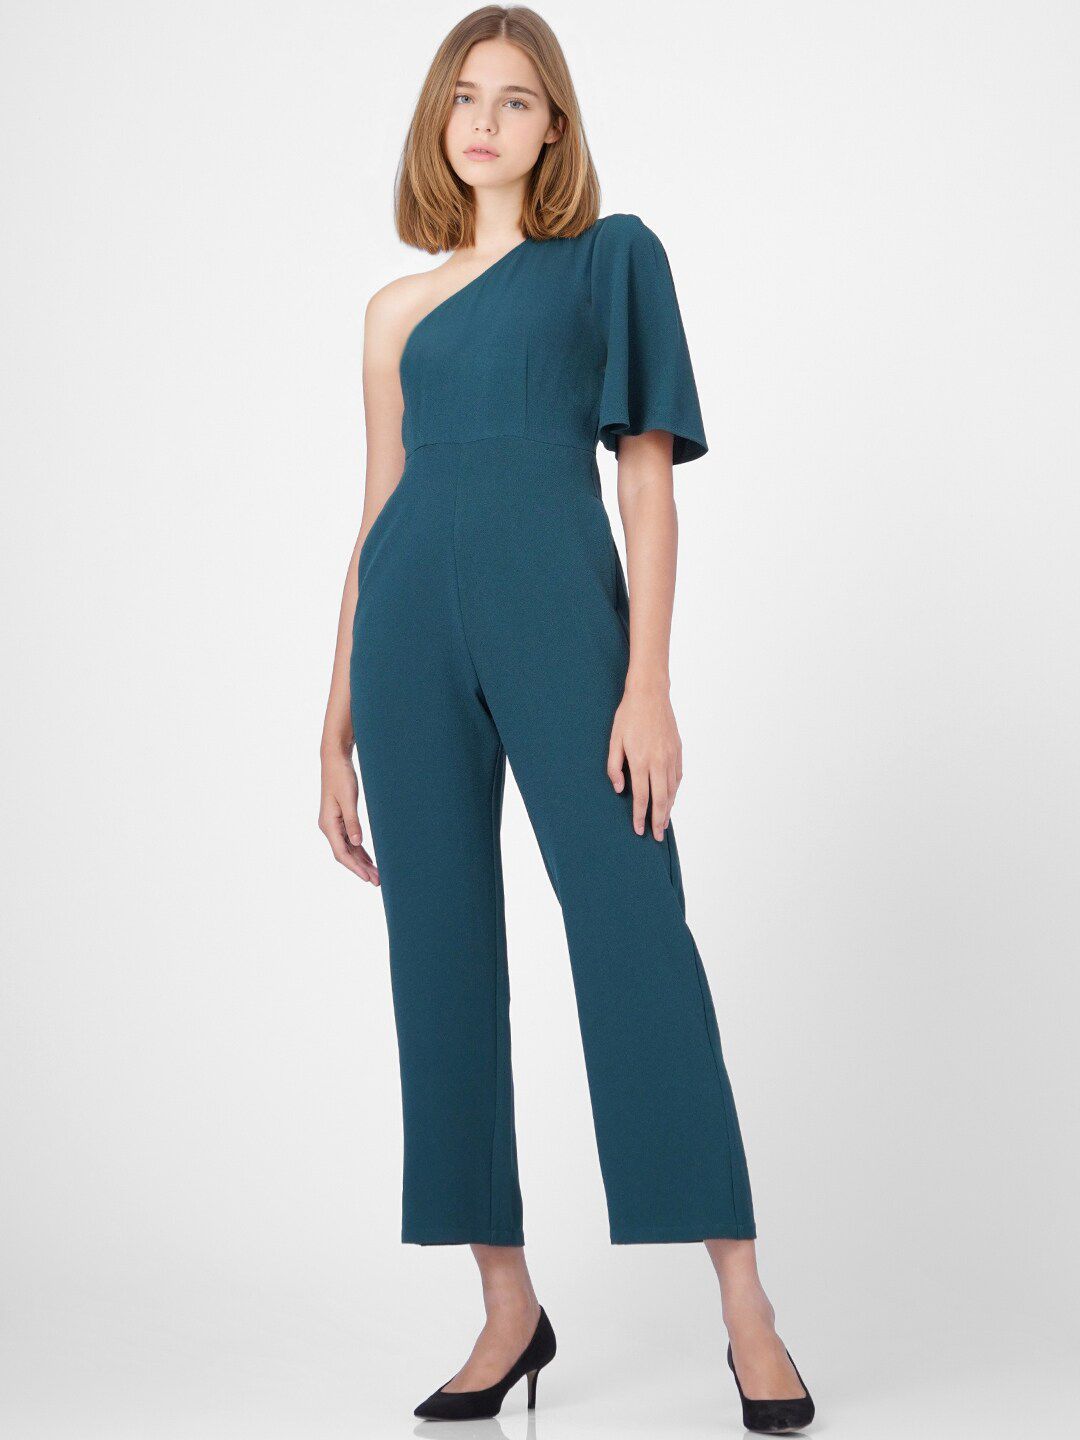 ONLY Teal Blue Basic Jumpsuit Price in India